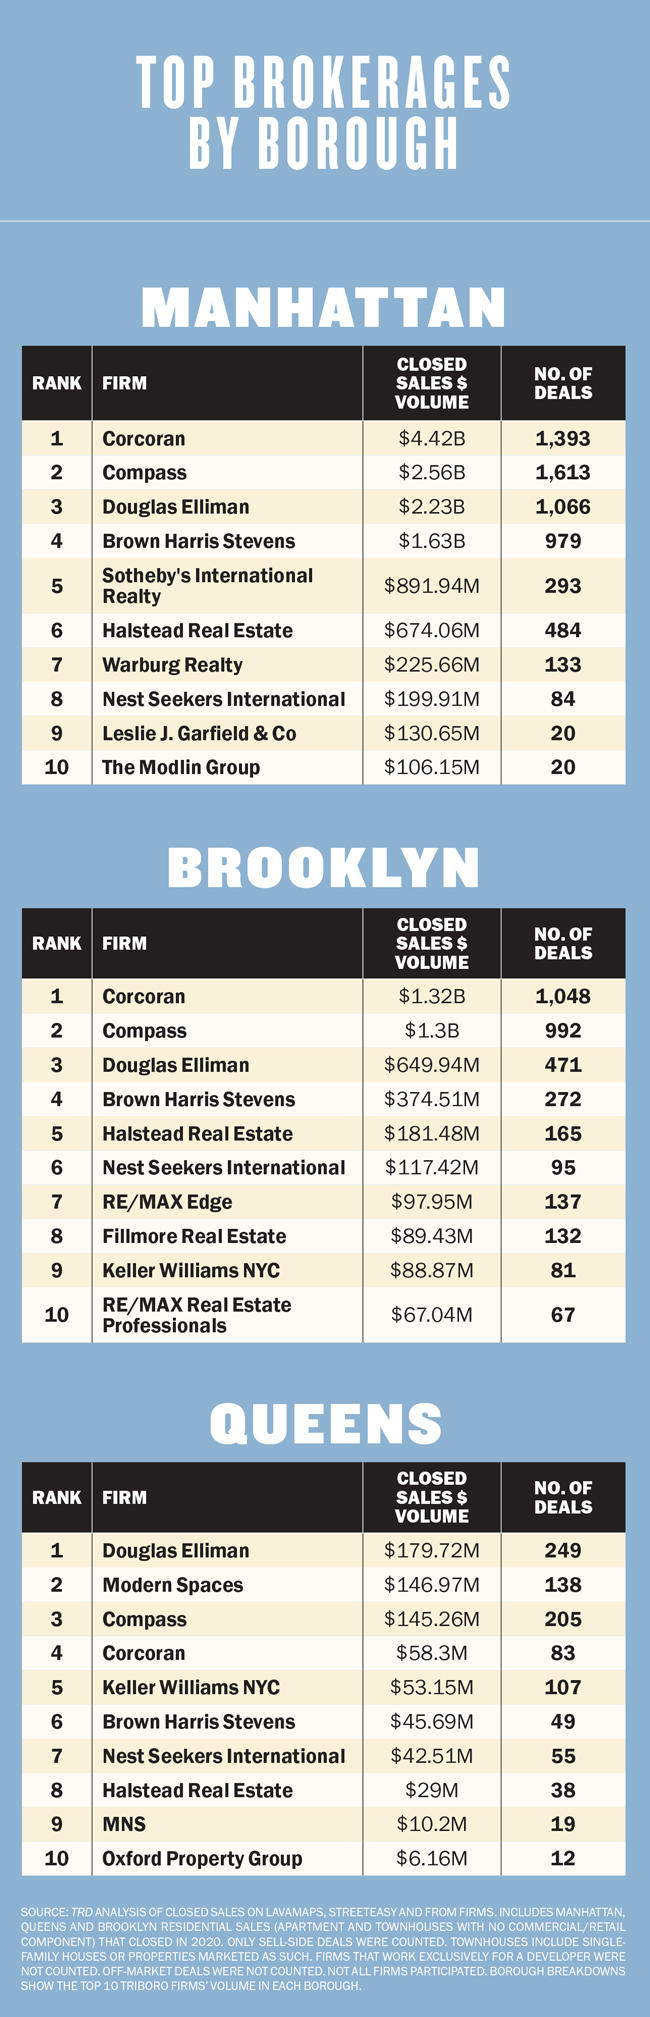 The Top Real Estate Companies in New York, Top Real Estate Companies